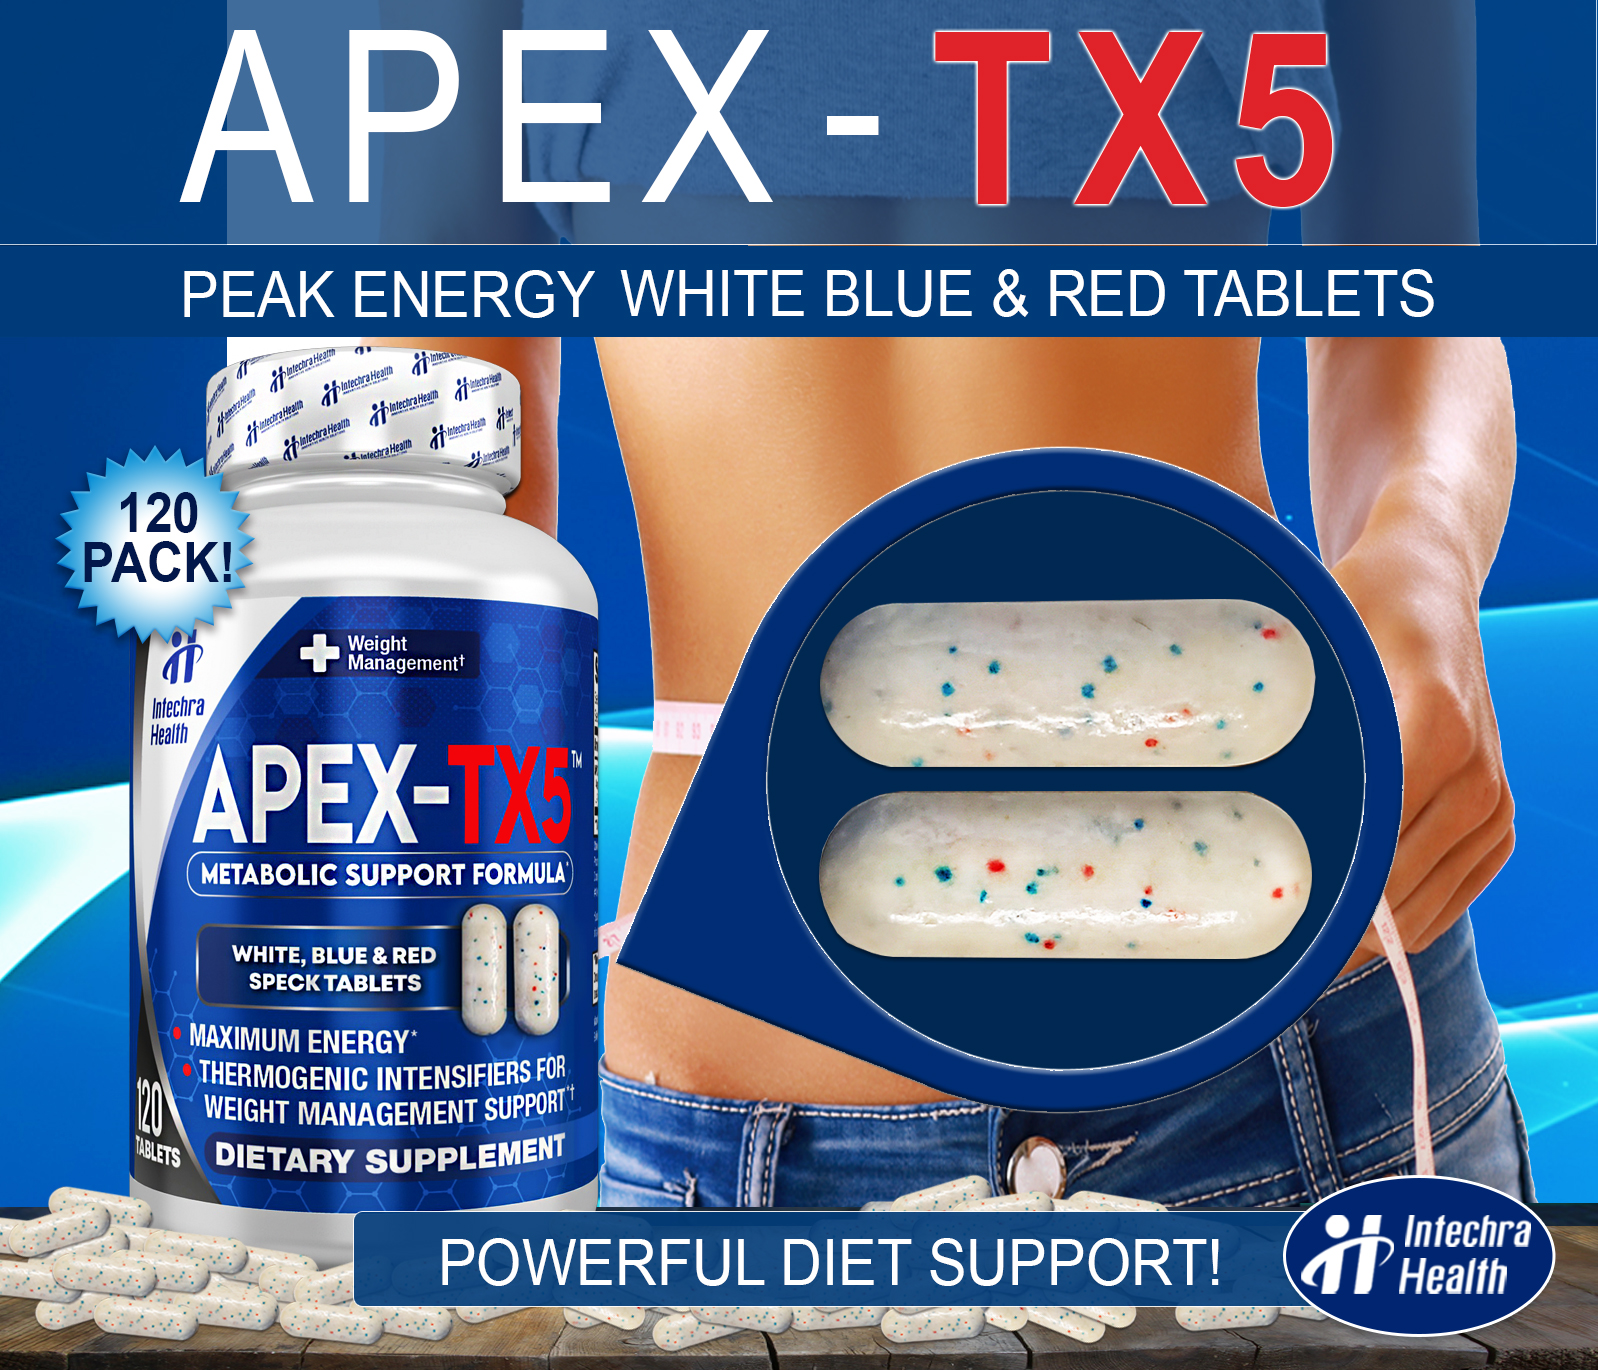 APEX-TX5 Diet Pills - Weight Management & Energy Support, 120 Tablets Per Bottle - image 2 of 7